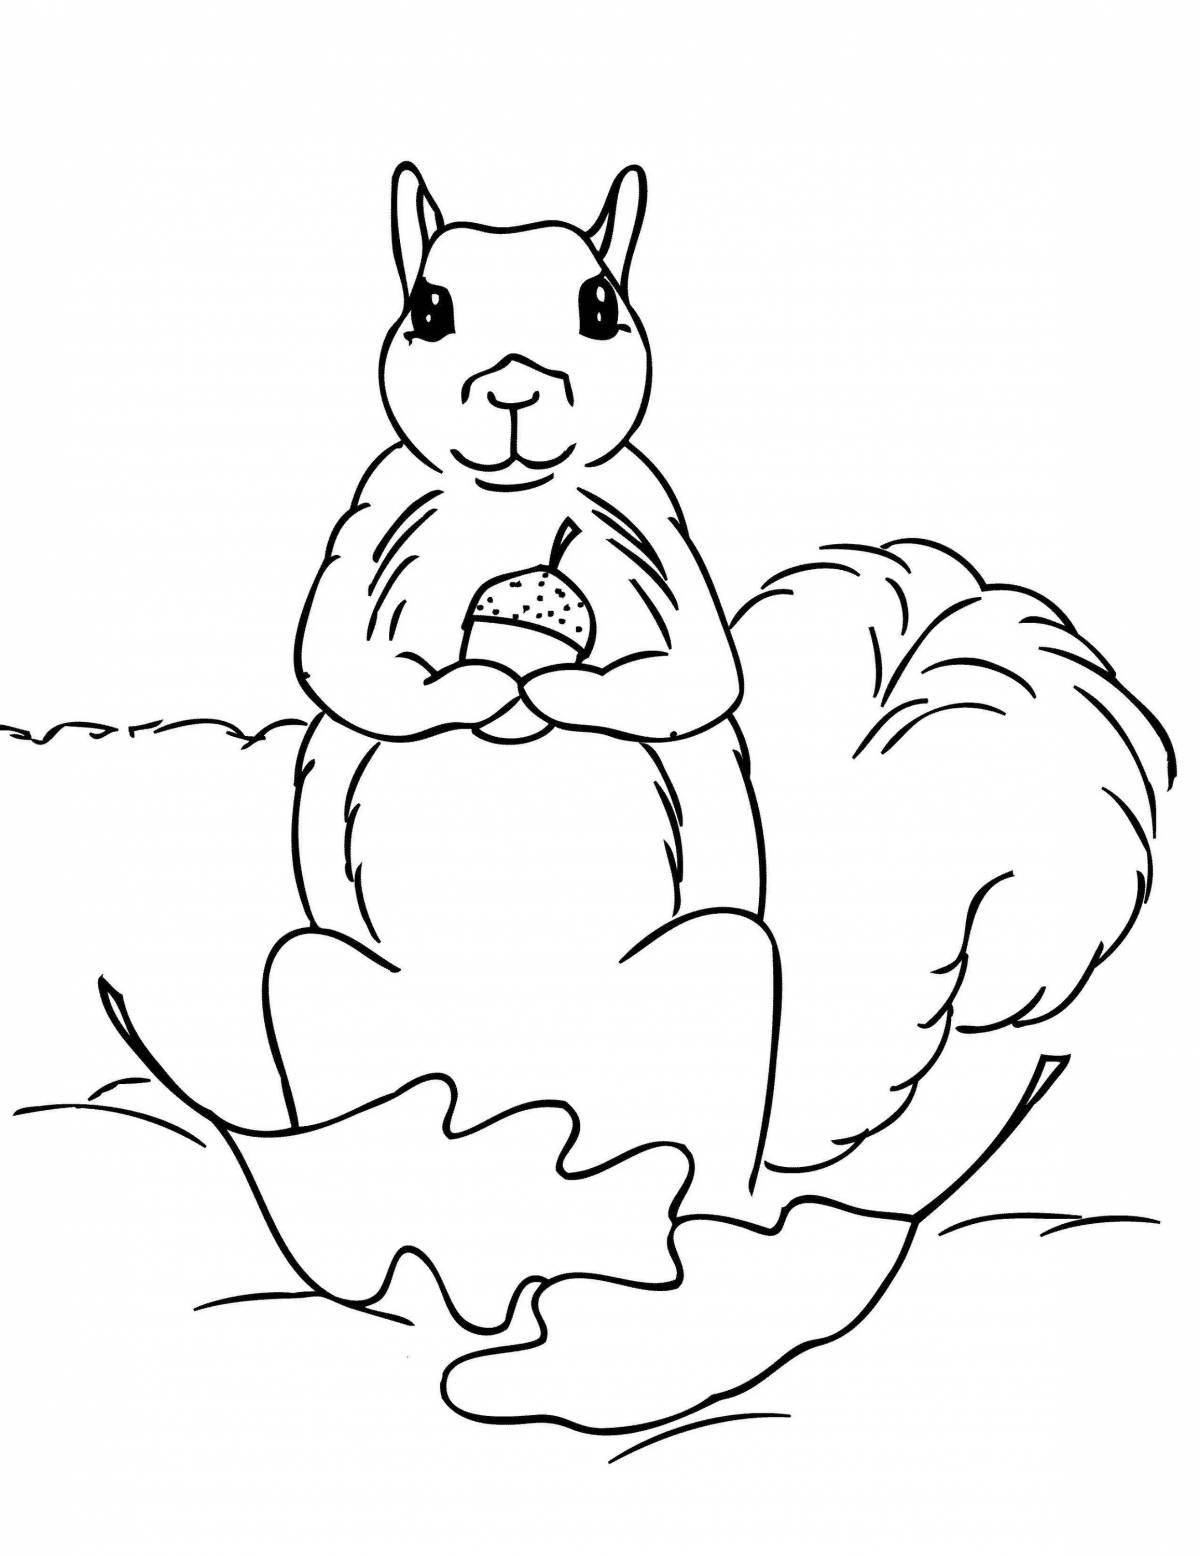 Sweet squirrel coloring for kids